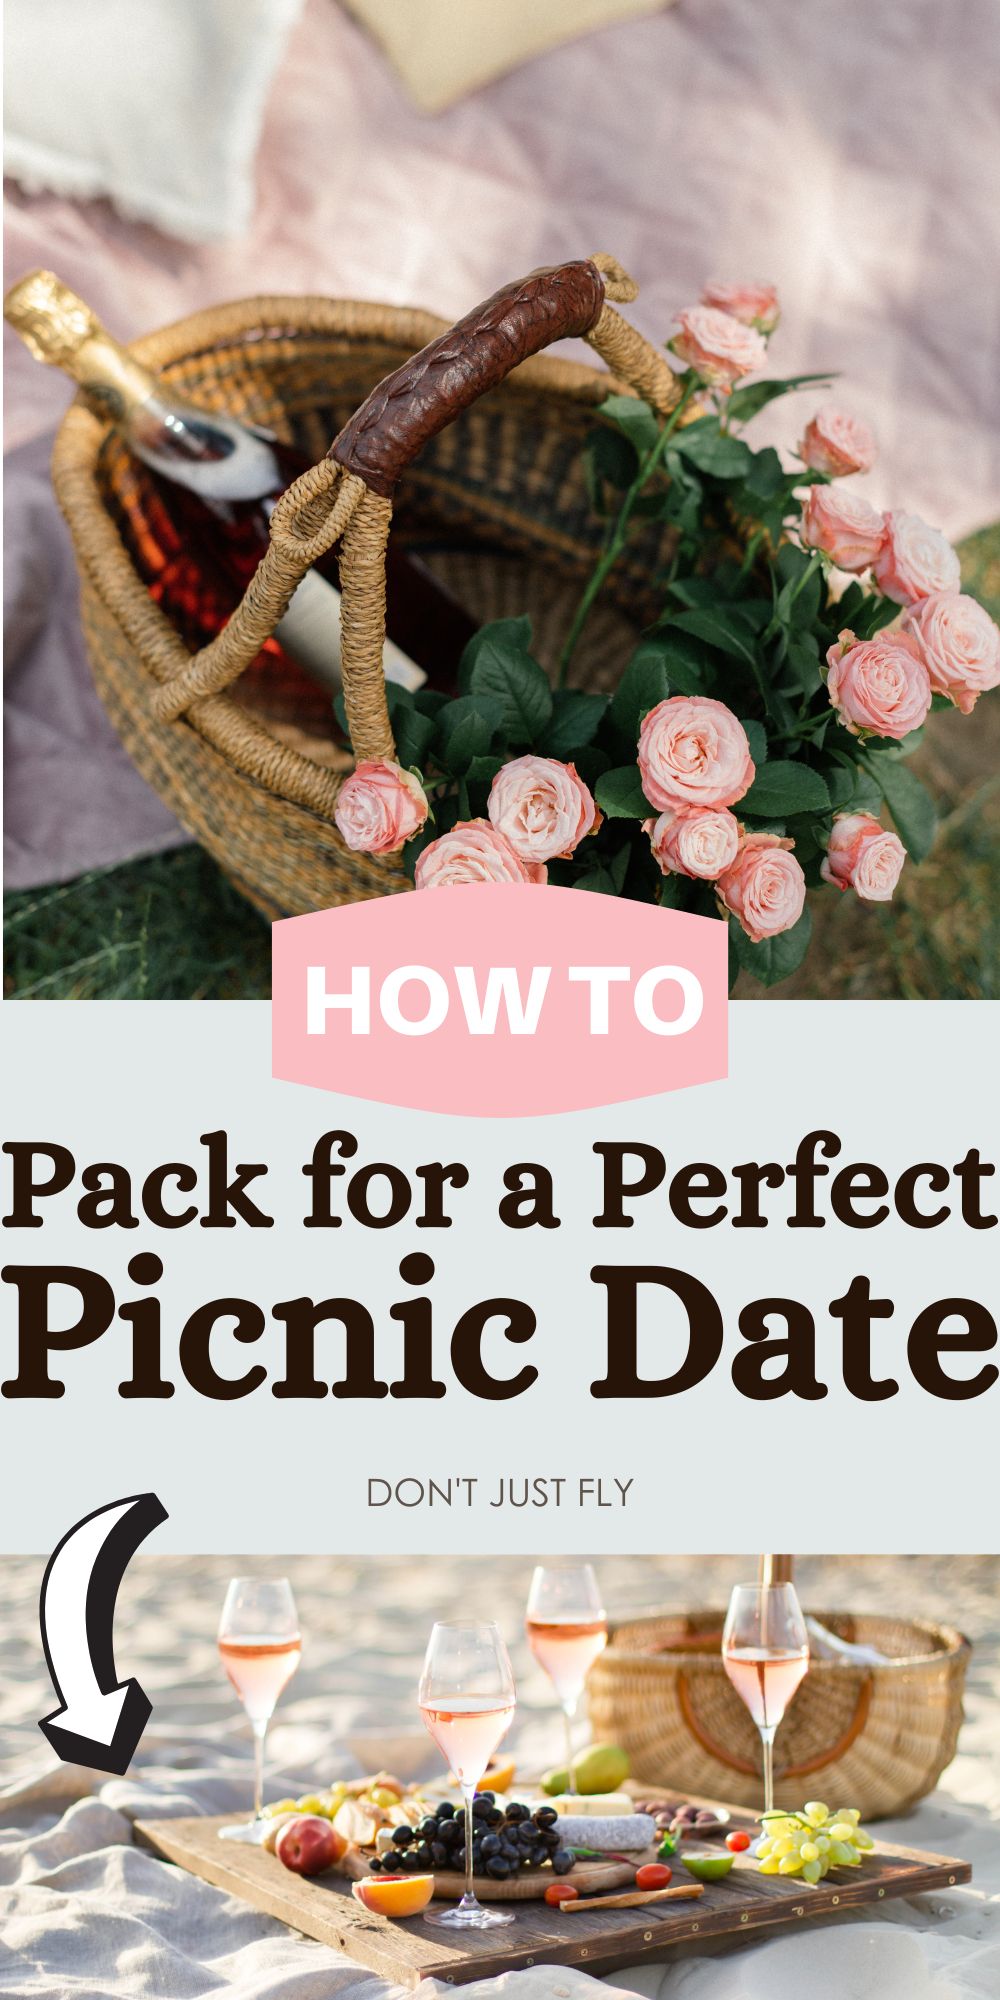 The photo collage shows a picnic basket filled with roses next to a beach picnic scene with wine.